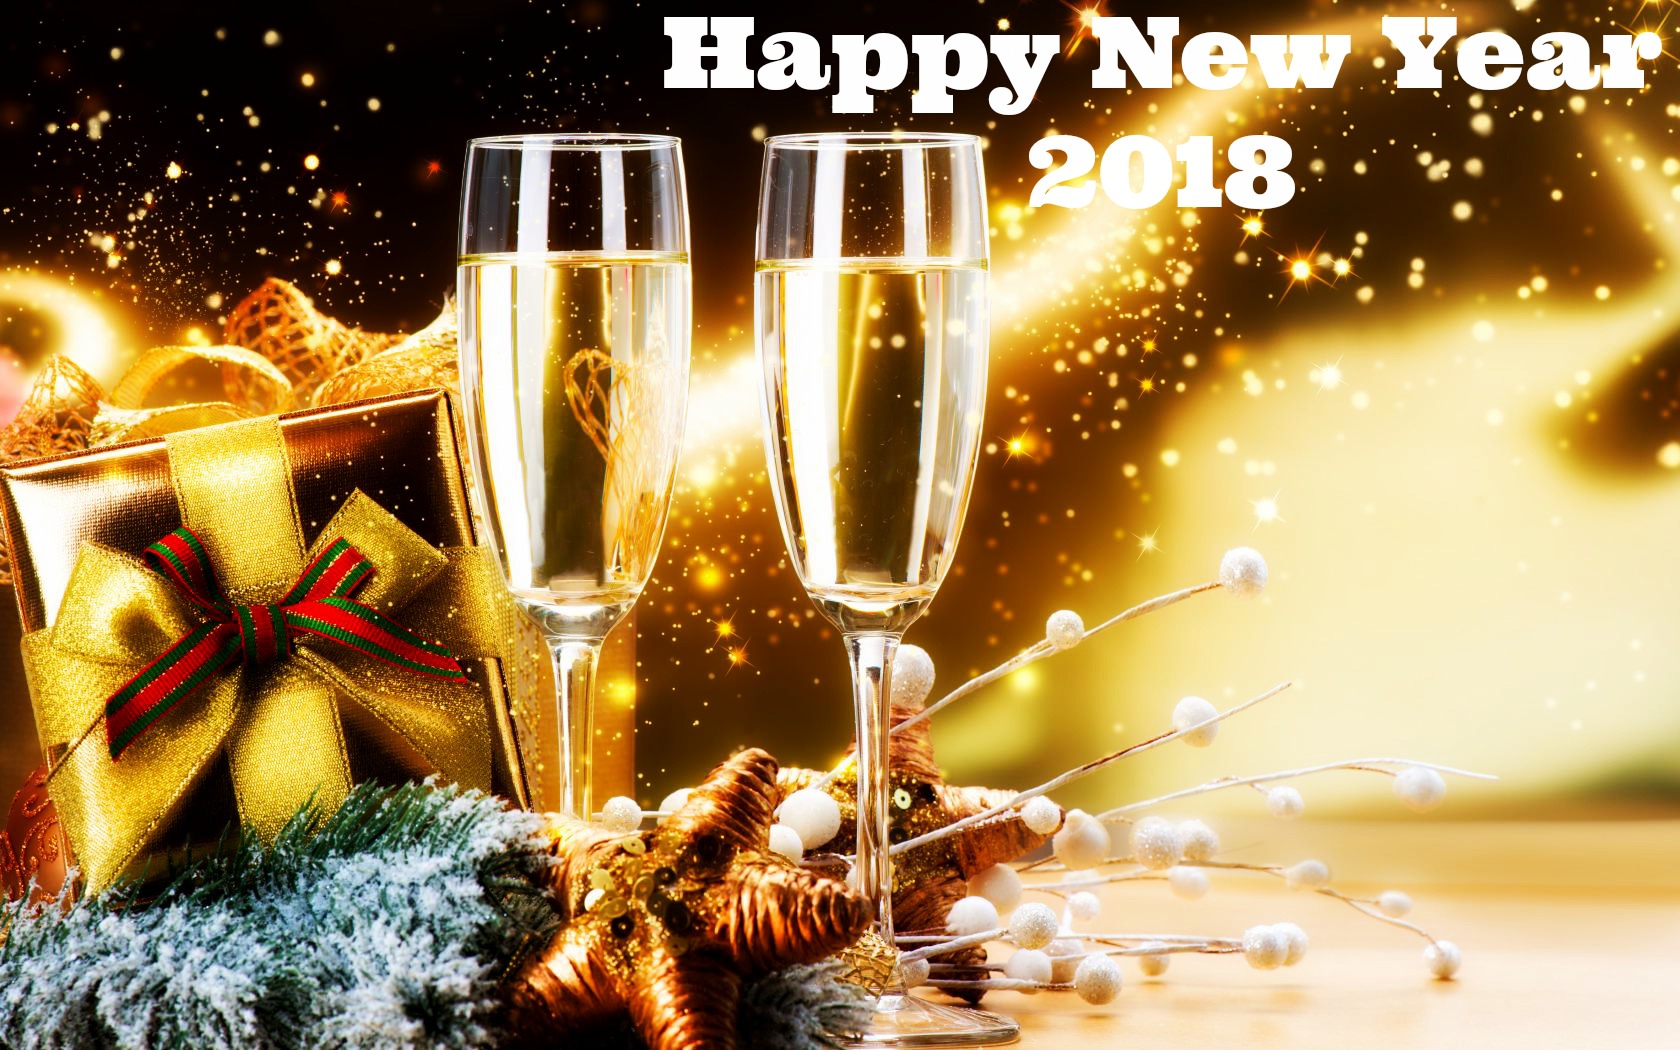 New Years Eve Animated New Year Screensavers - New Year's Eve 2018 - HD Wallpaper 